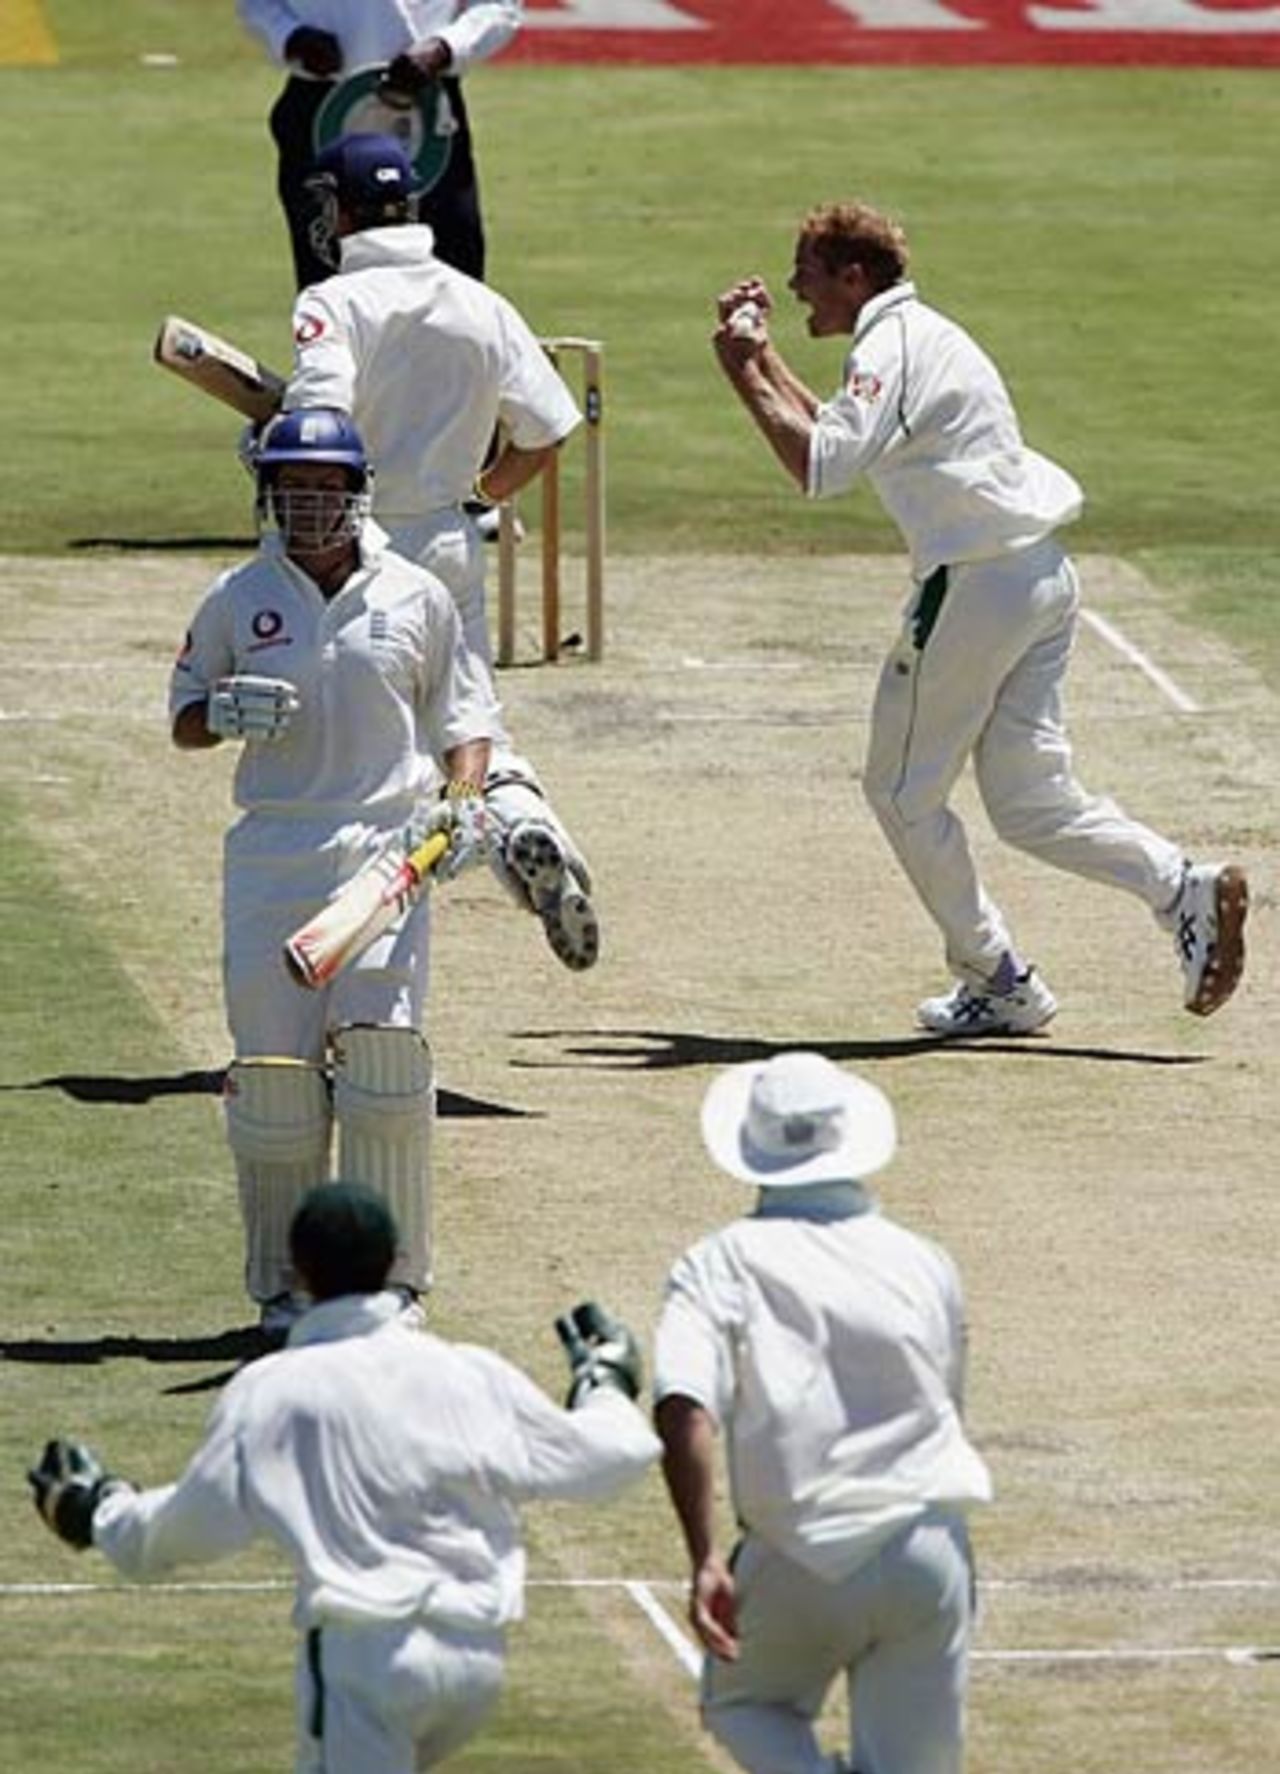 Delight for Shaun Pollock as Michael Vaughan holes out for 0, South Africa v England, 5th Test, Centurion, January 23, 2005